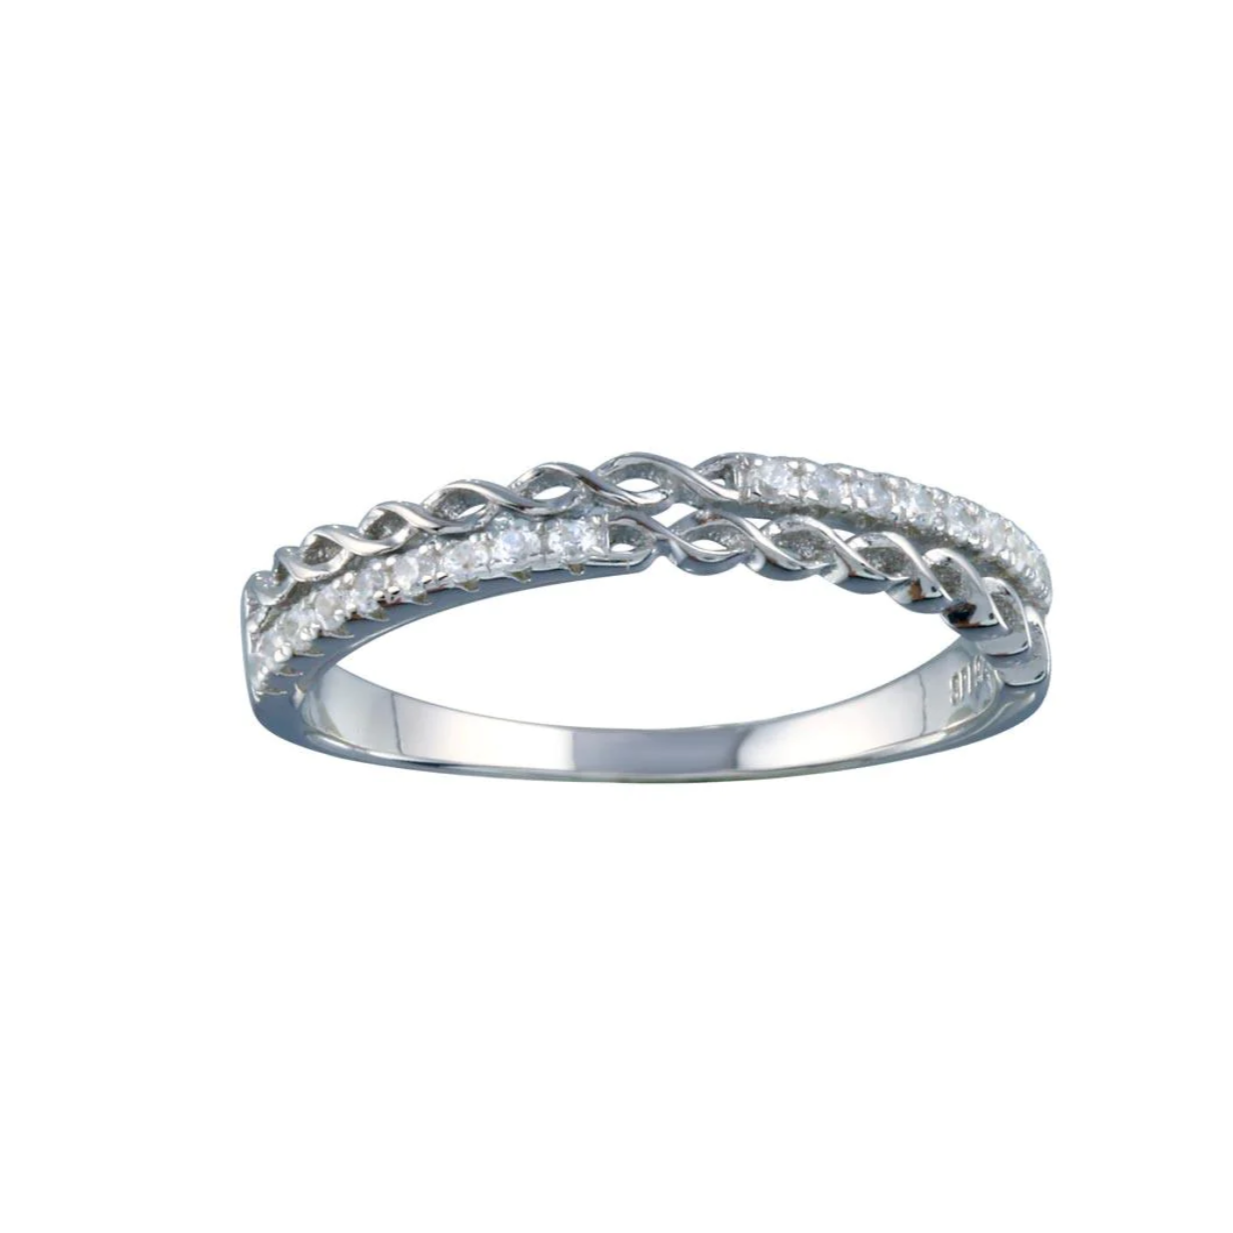 Silver 925 Rhodium Plated Micro Eternity CZ Ring